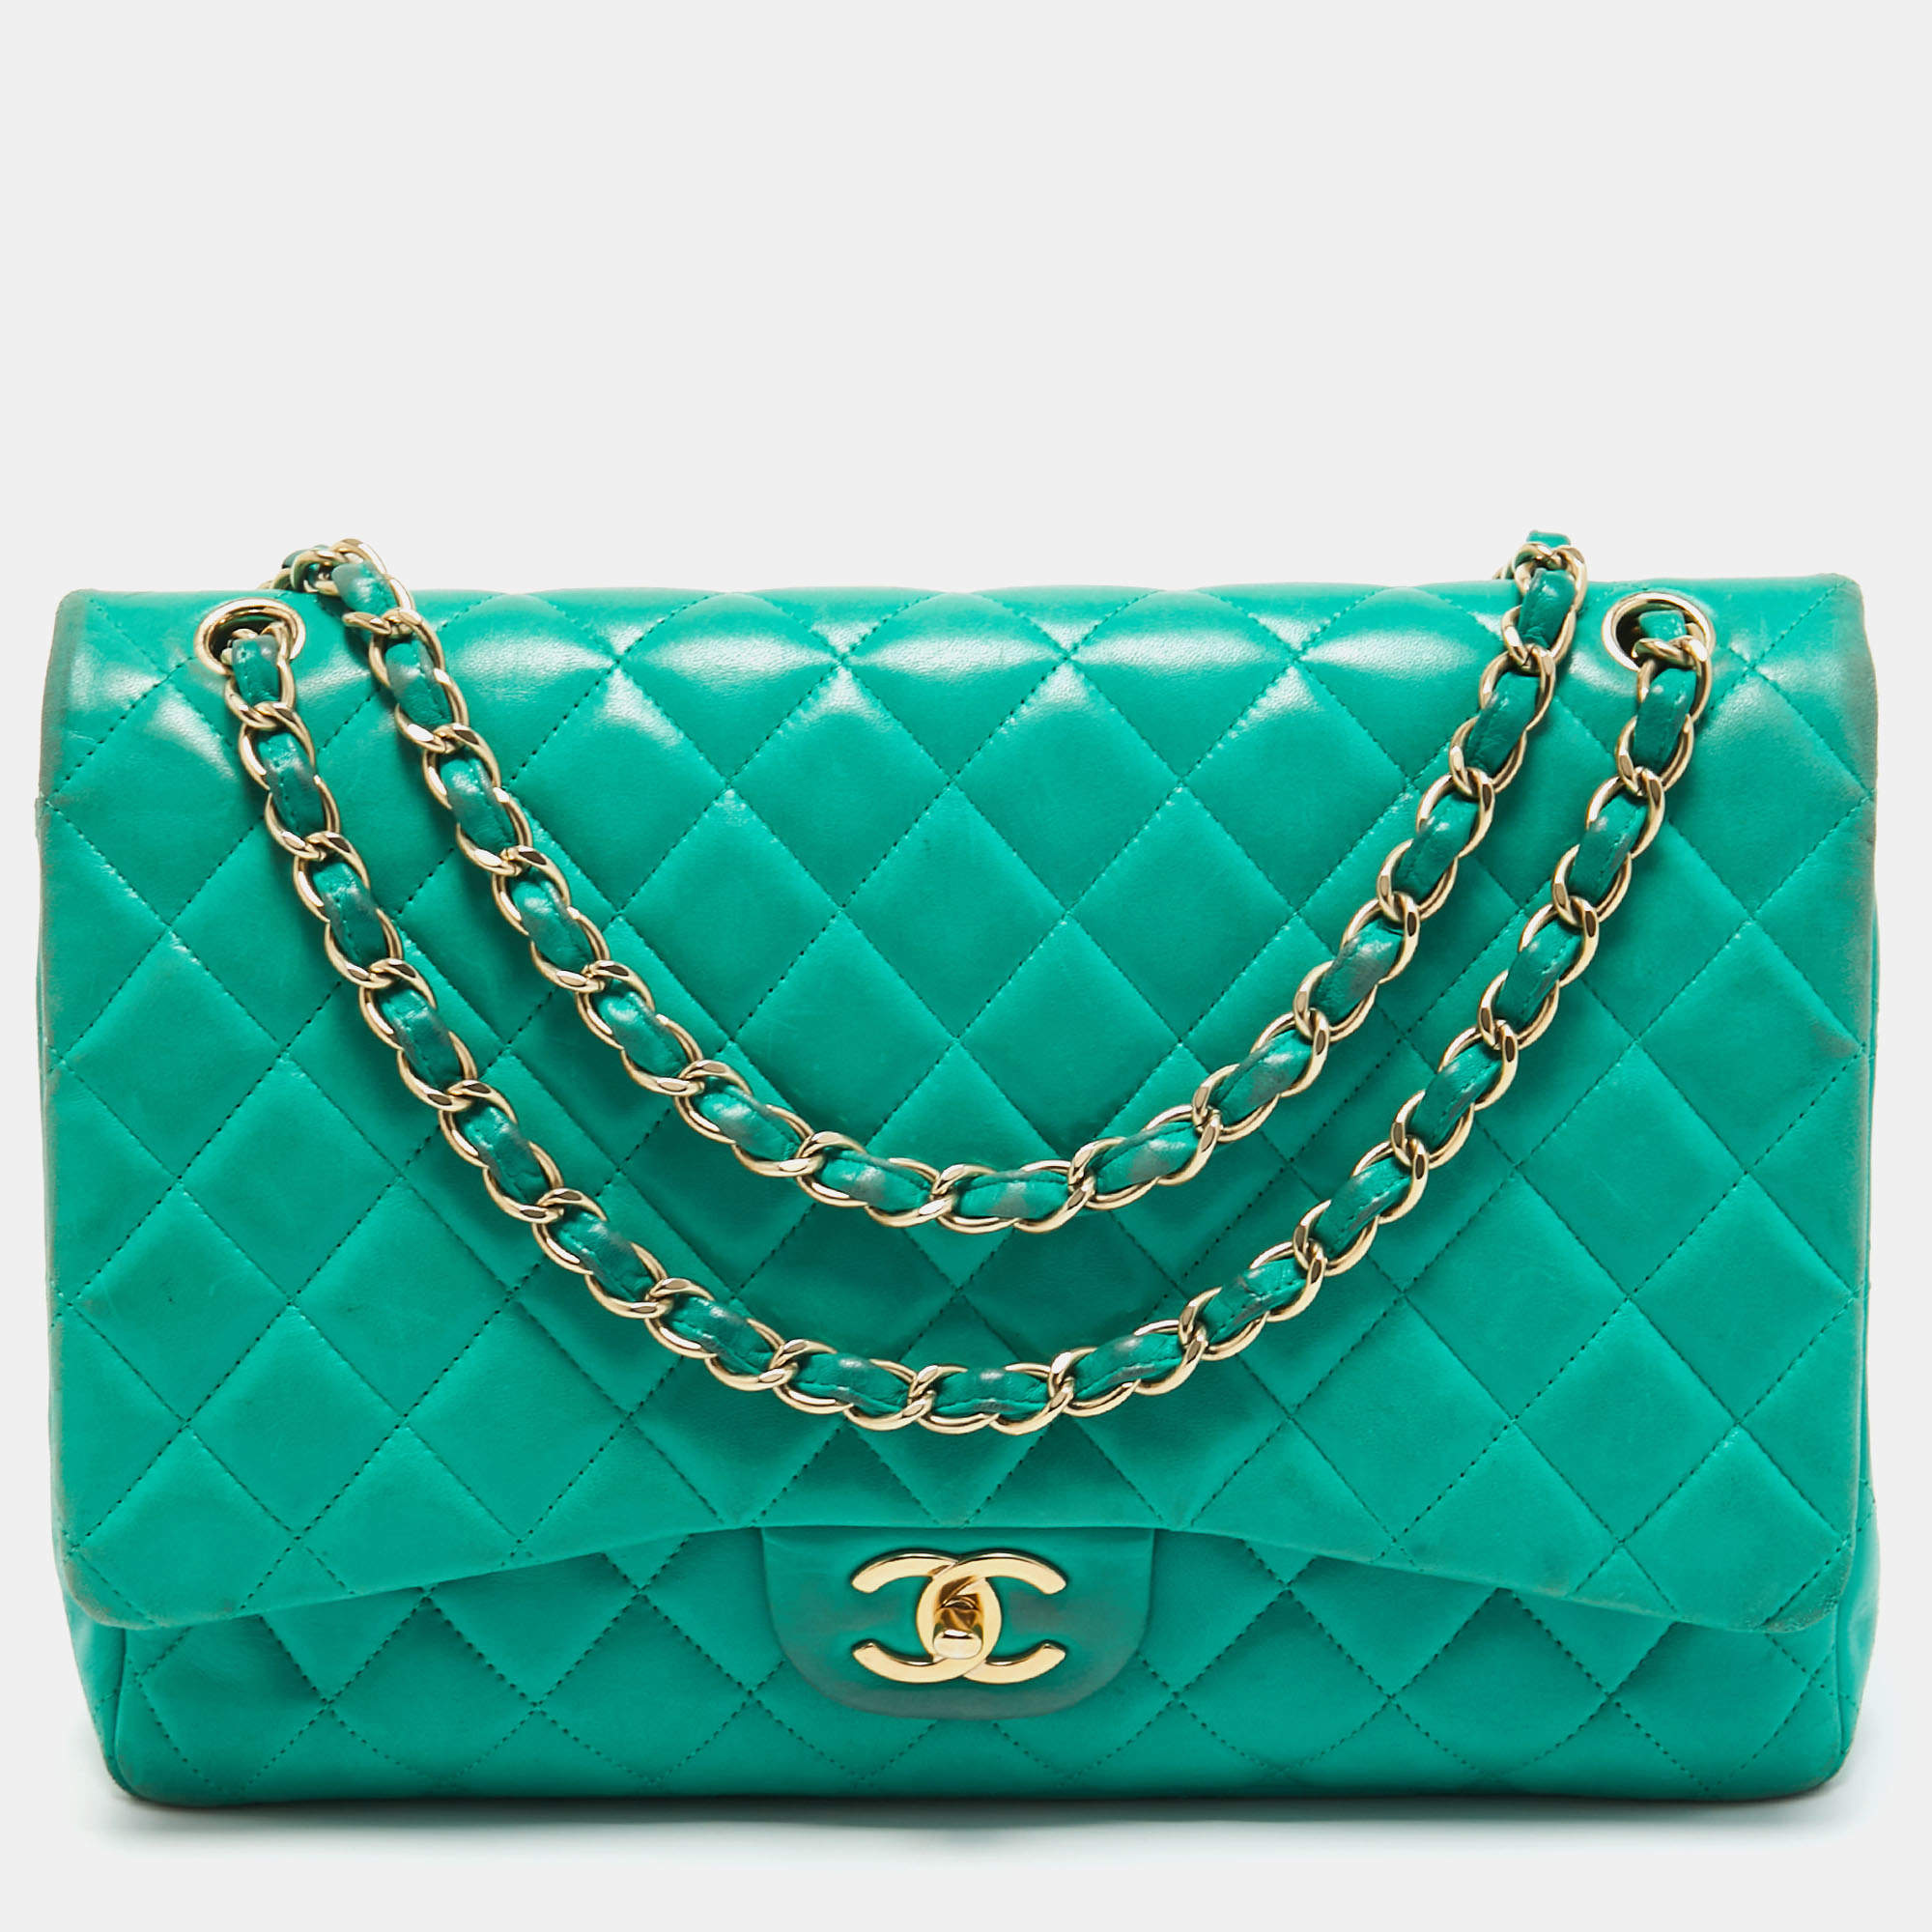 Chanel Green Quilted Lambskin Leather Maxi Classic Double Flap Bag Chanel